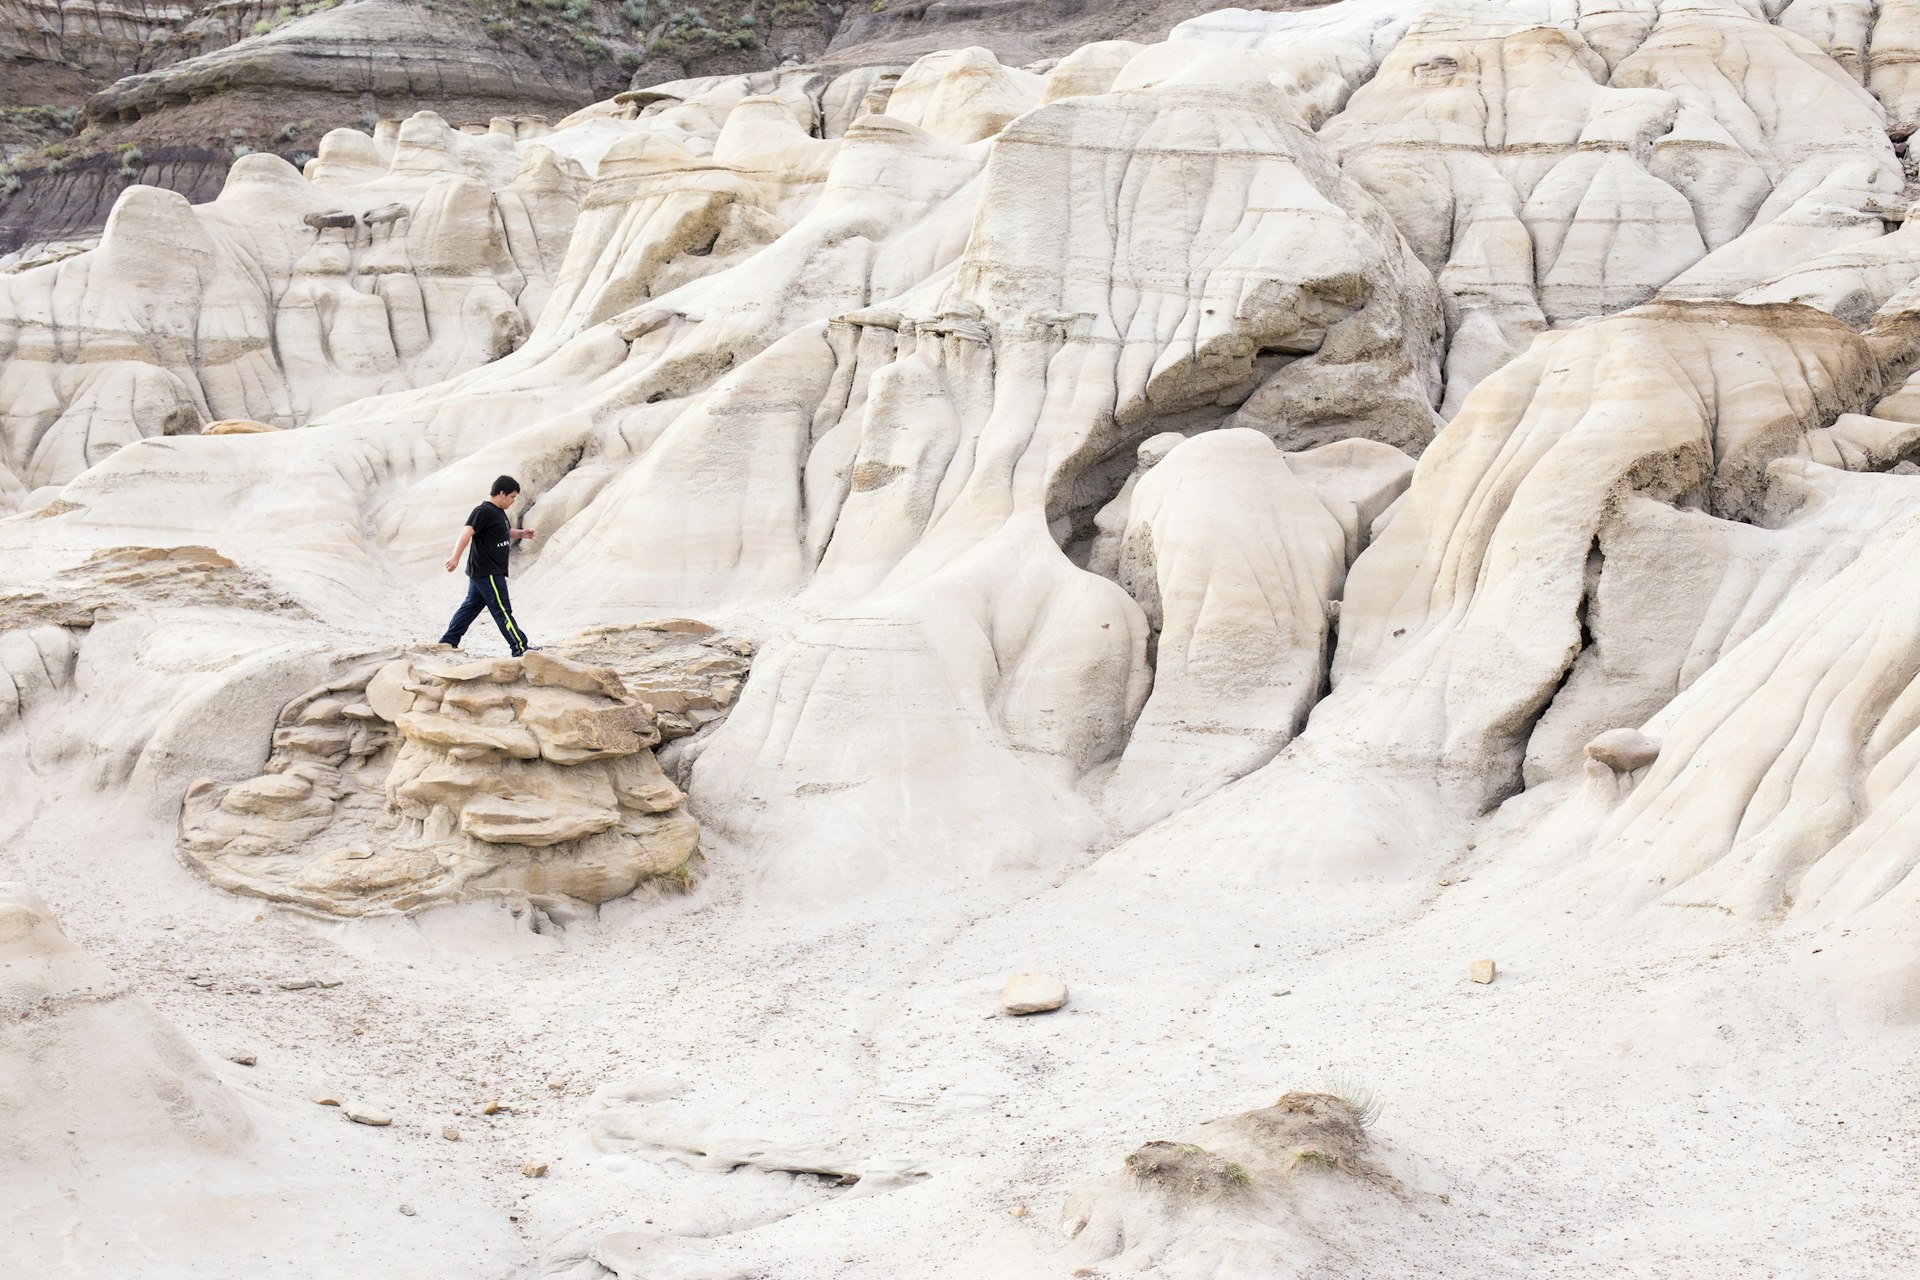 A teenager hikes across a white rocky landscape